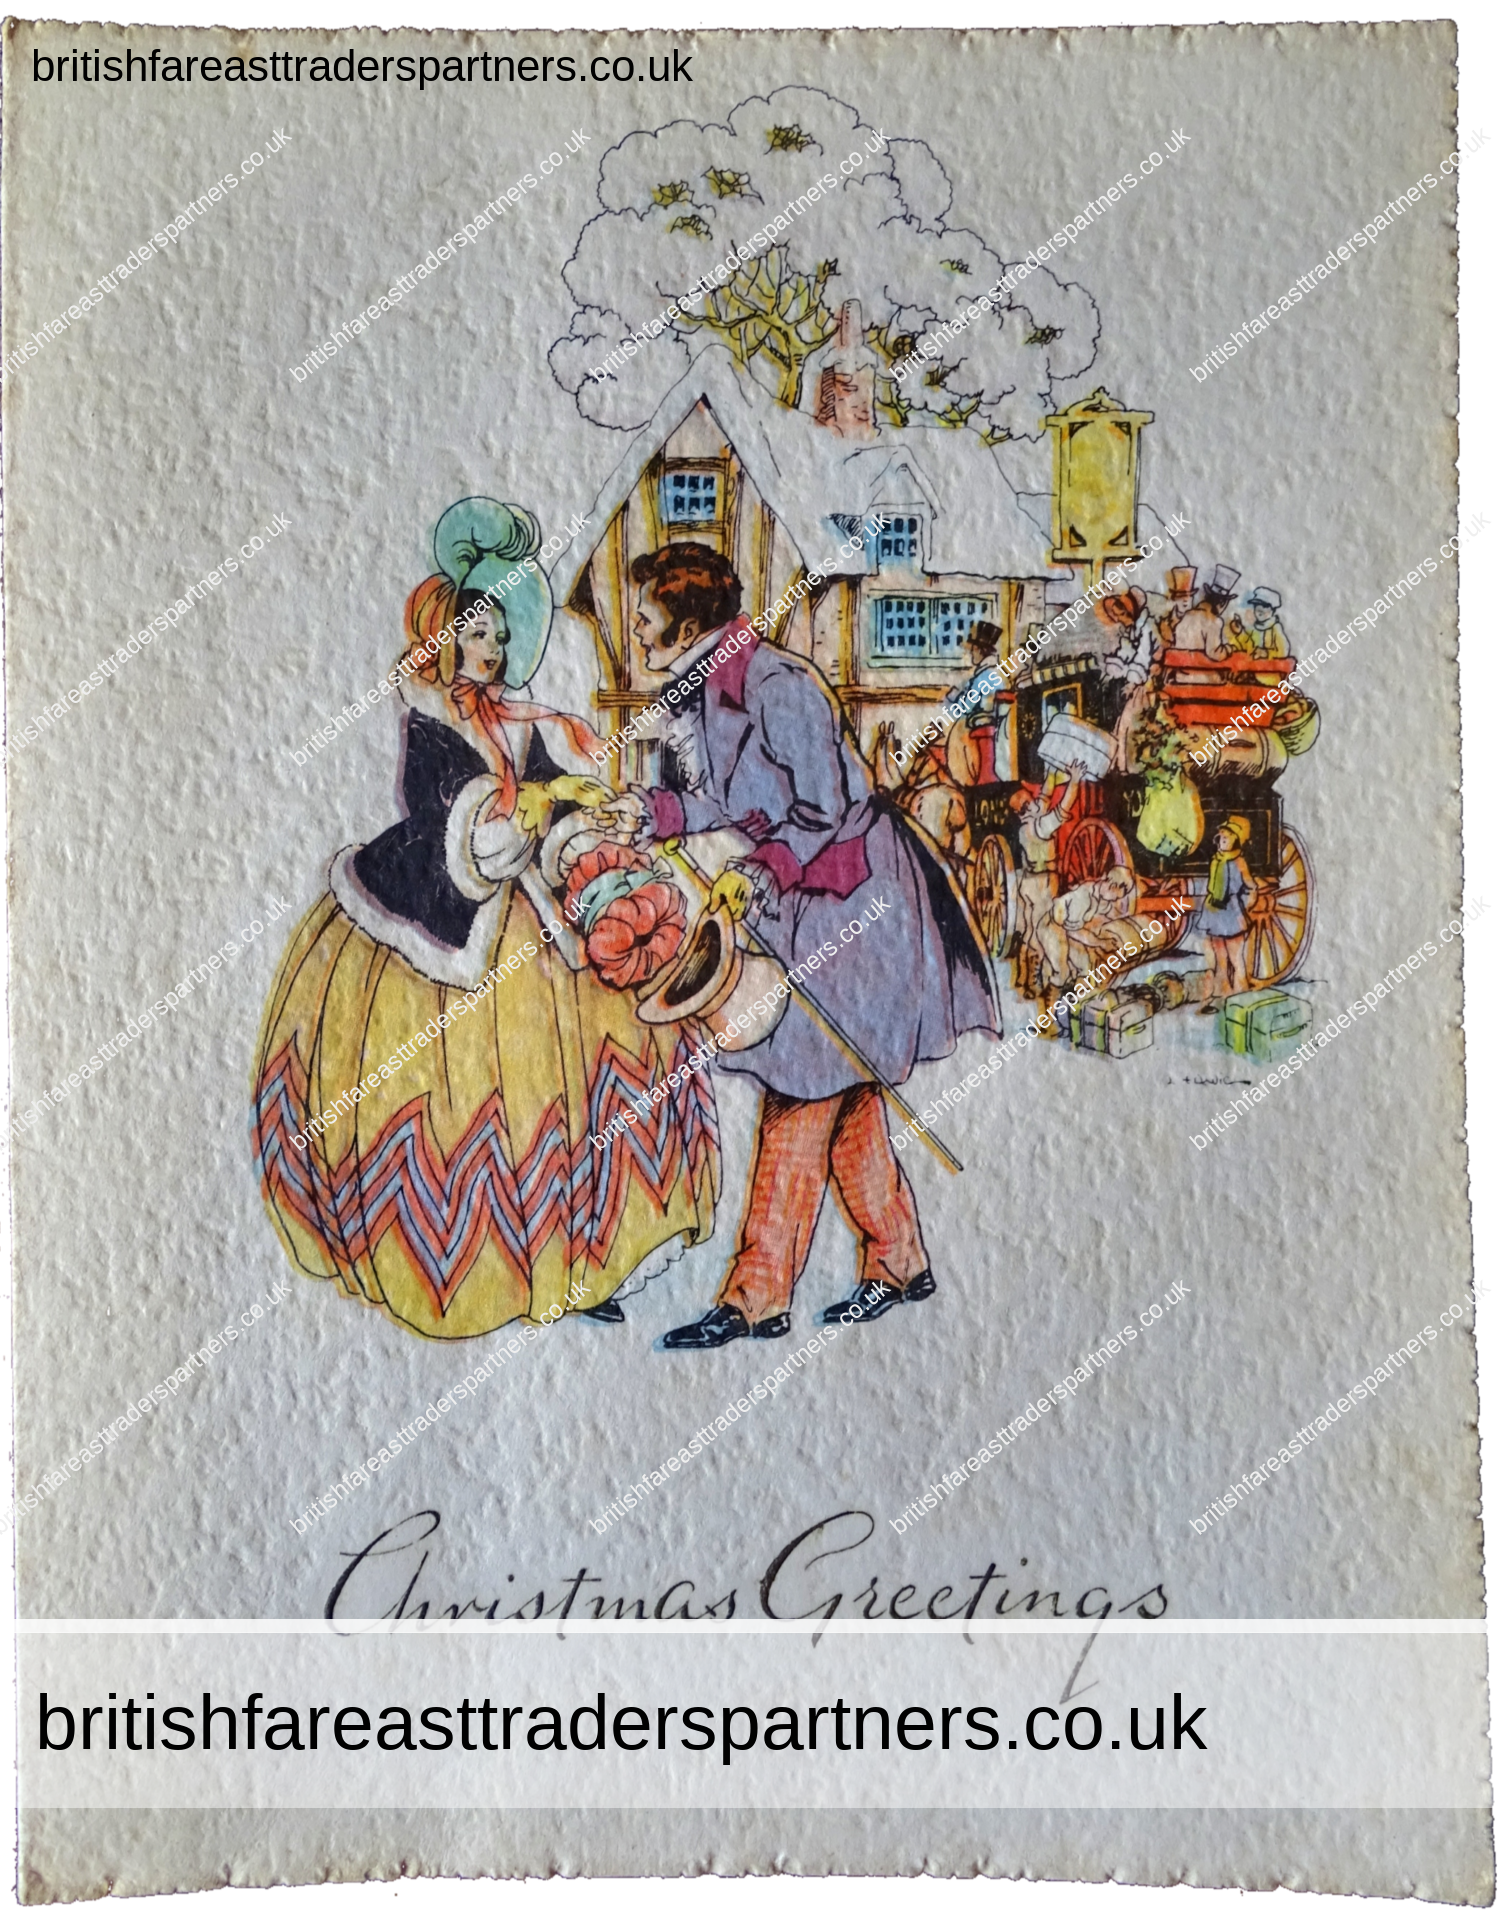 VINTAGE / ANTIQUE CHRISTMAS GREETINGS CARD  “CHRISTMAS GREETINGS” E.H DAVIES ARTWORK YOUNG LADY & A GENTLEMAN VILLAGE / TOWN / COUNTRY PRINTED IN GREAT BRITAIN BRITISH | COLLECTABLES | PAPER & EPHEMERA GREETINGS CARD | CHRISTMAS